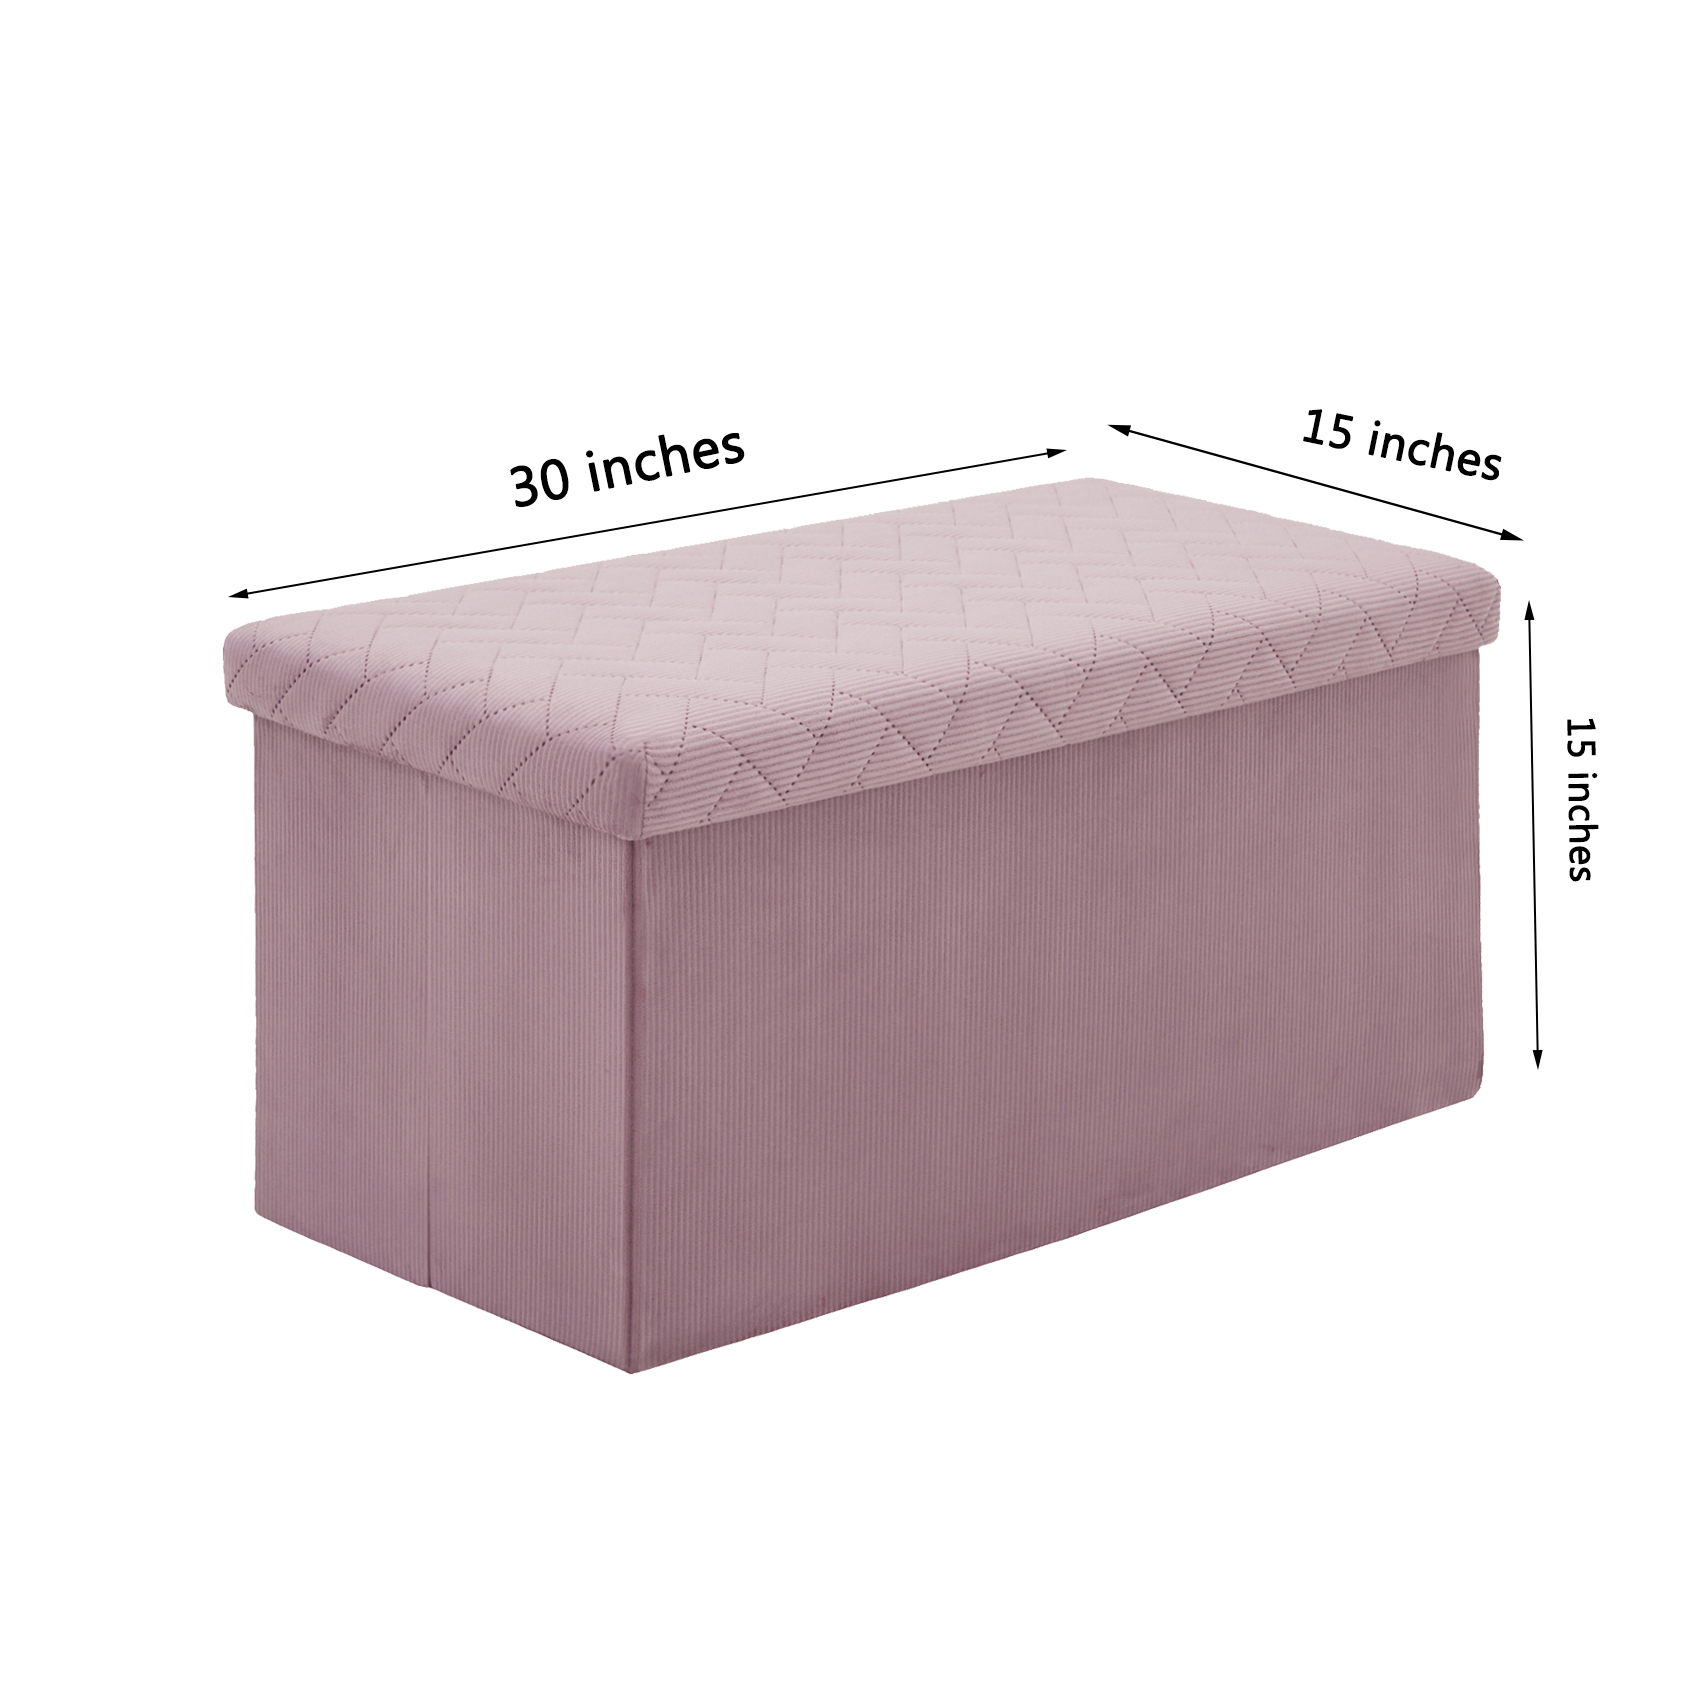 PINPLUS 30.1" Folding Pink Velvet  Storage Ottoman Bench with Lid for Living Room, Long Shoes Bench, Toys Chest Box, Foot Rest Stool Seat - image 4 of 7